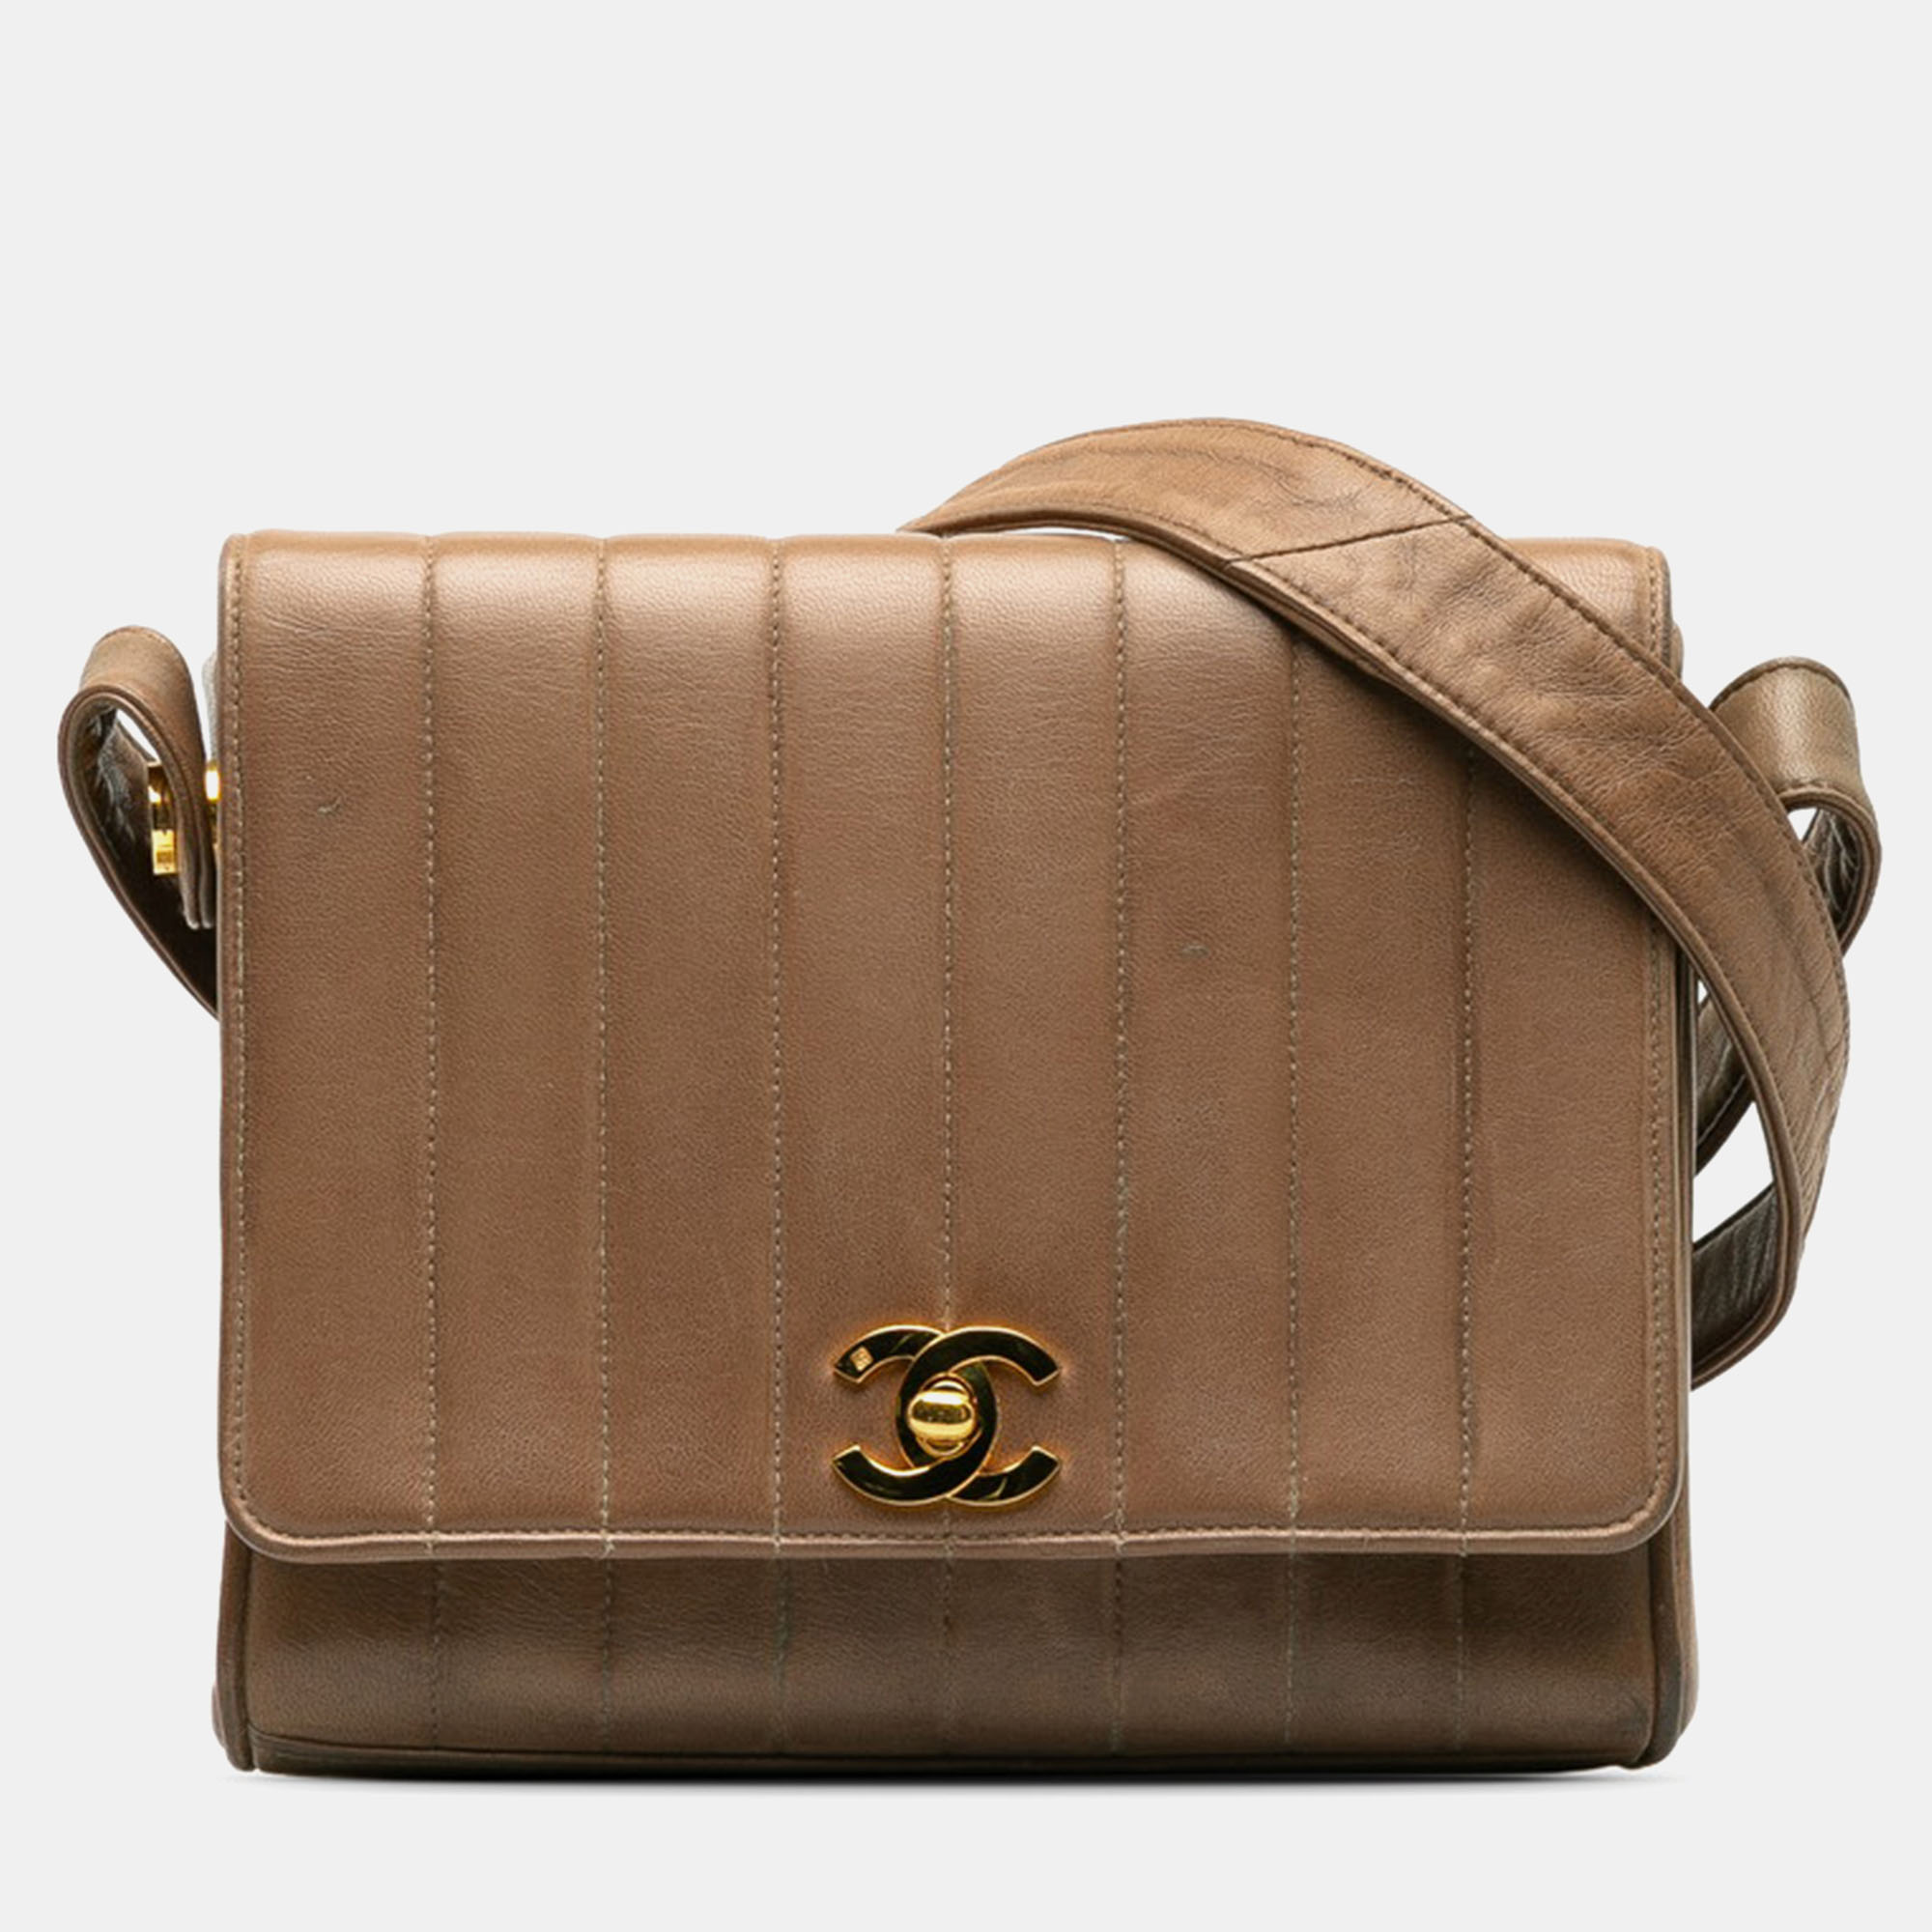 Chanel brown leather vertical classic flap bag